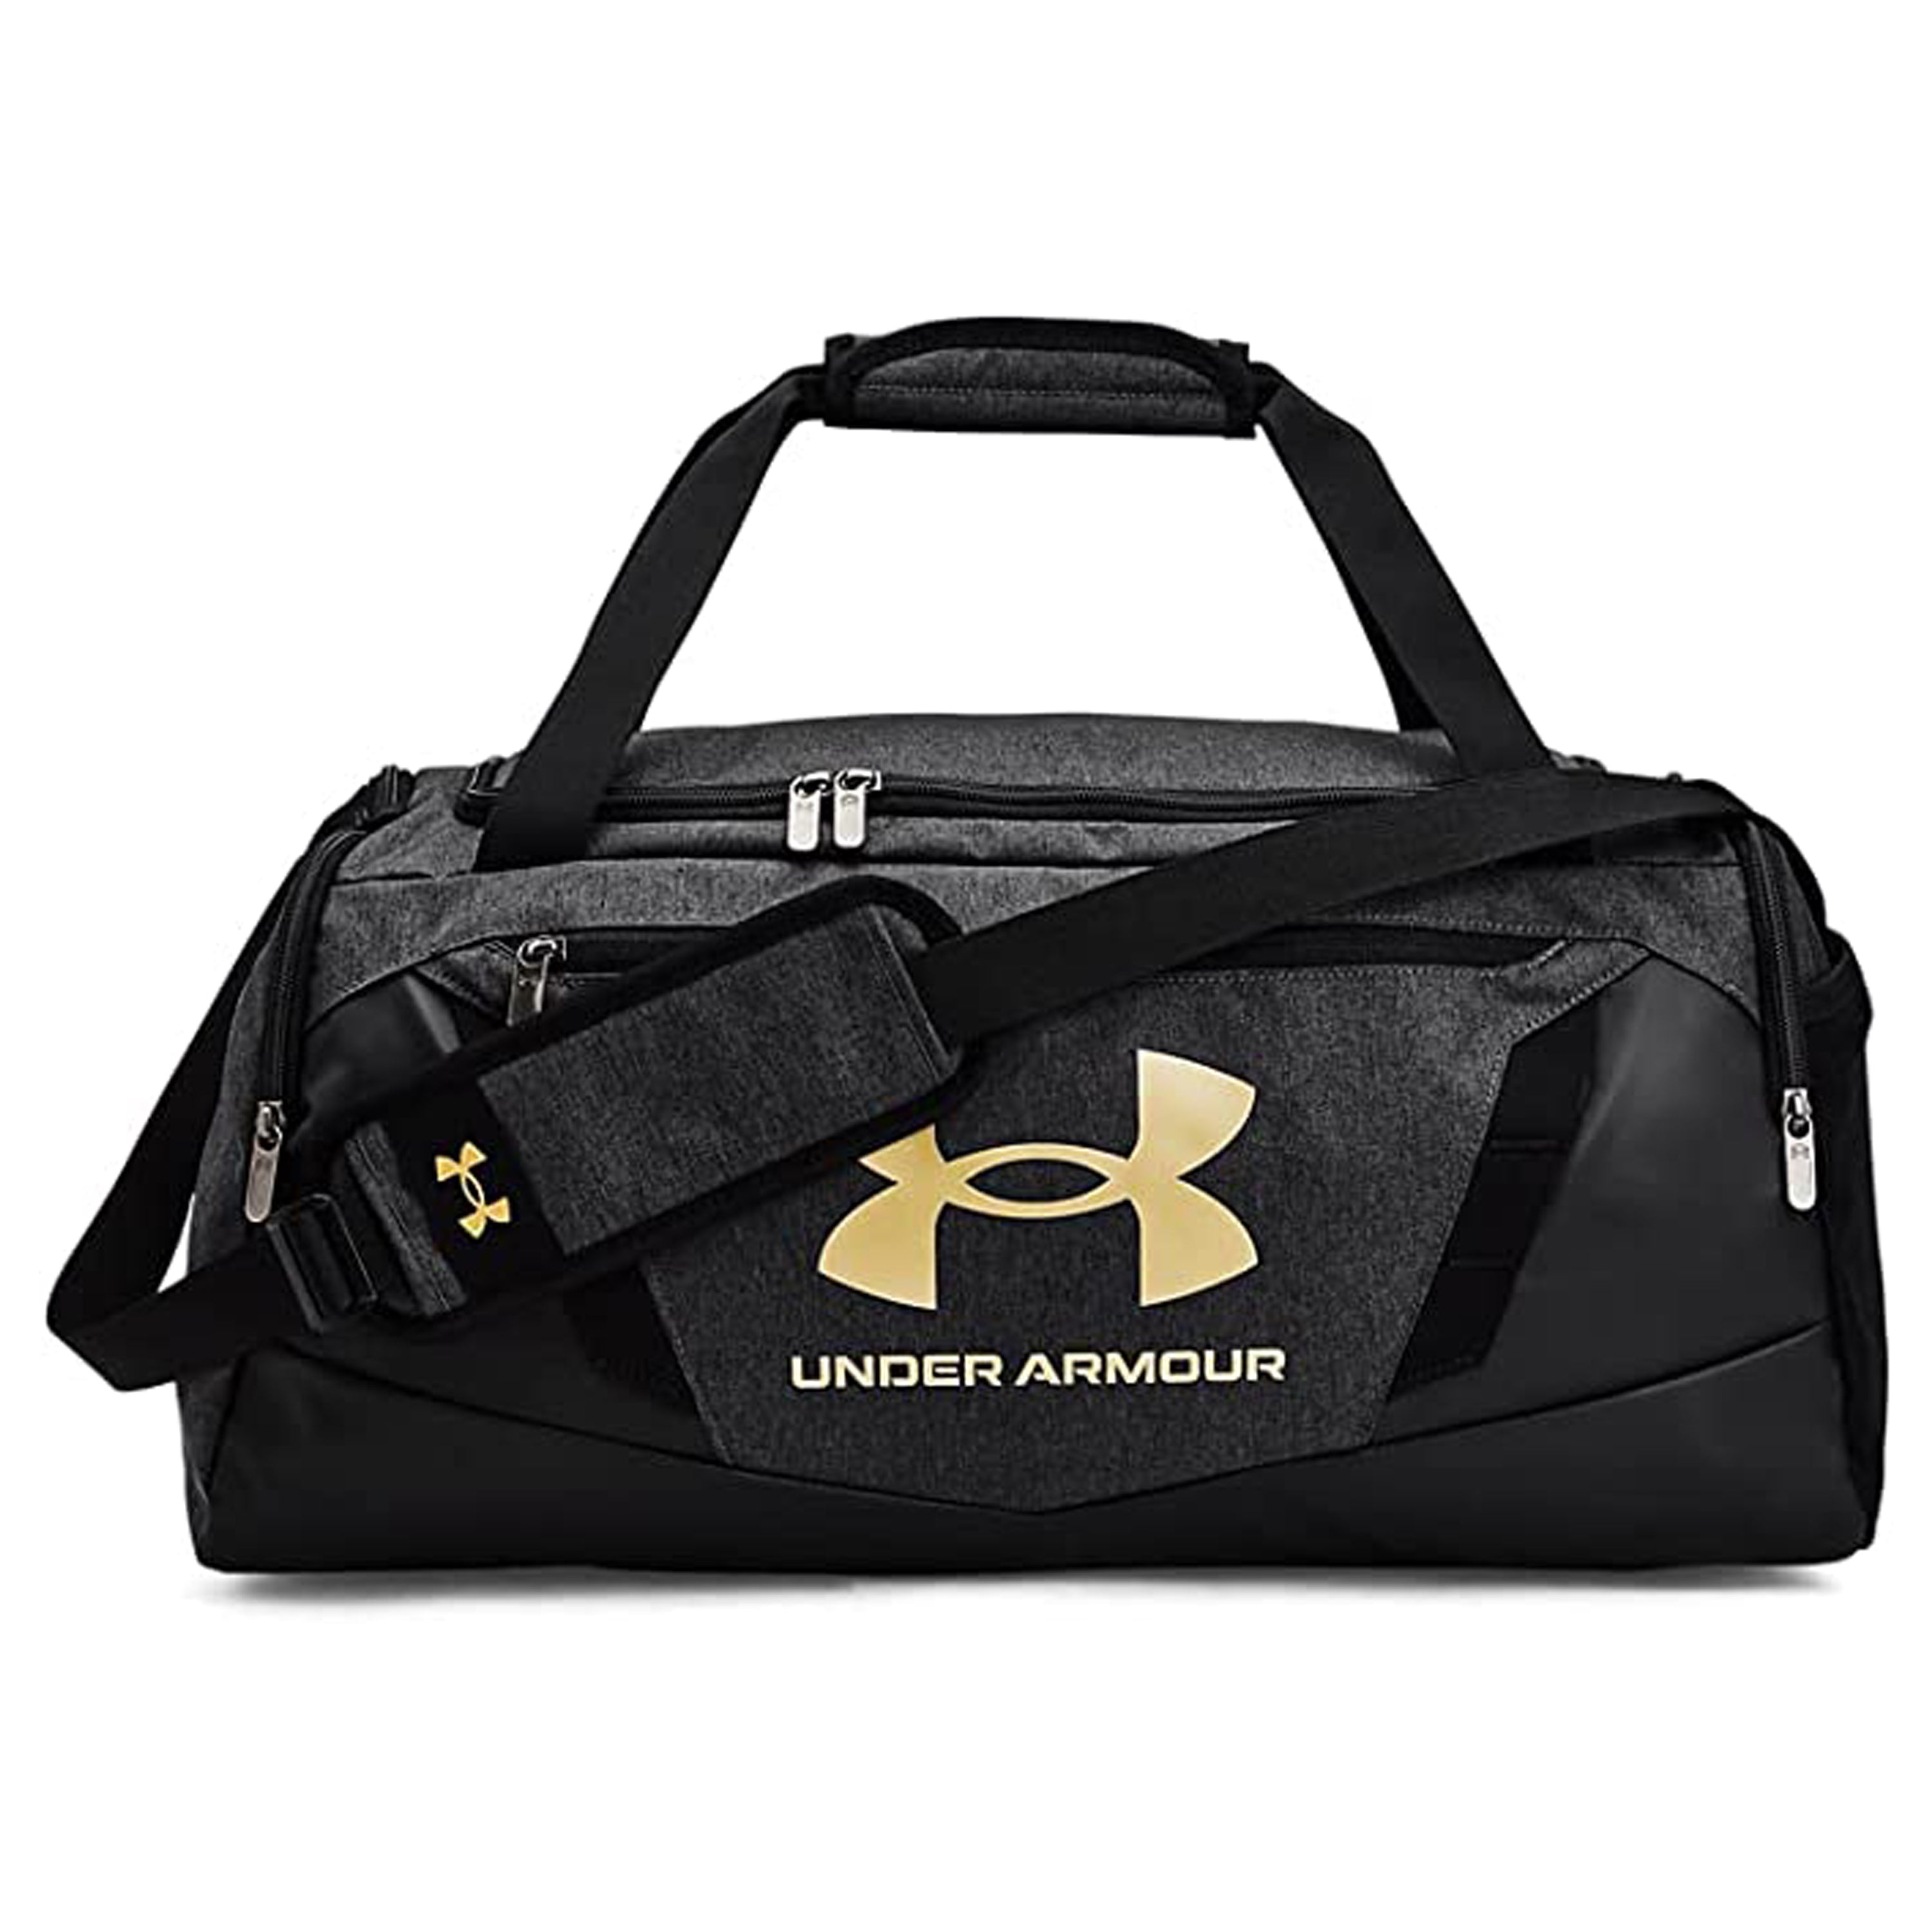 Under Armour Undeniable 5.0 Duffle Bag Small - Black/Metallic Gold, OS –  CosmosSports